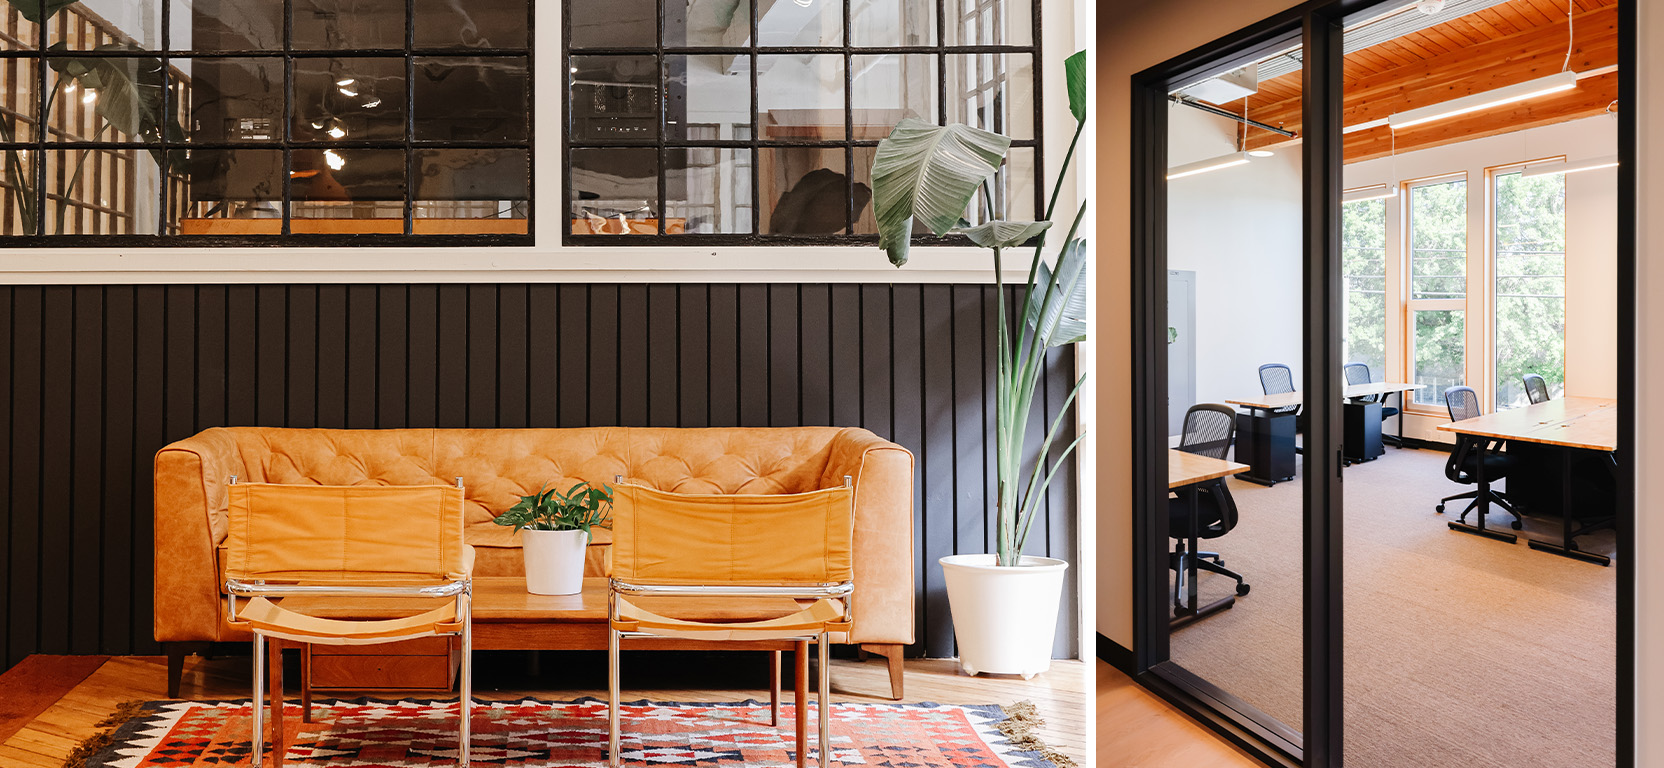 Left image: Modern bohemian office space seating area with dark walls and trim, tufted sofa and vintage-style camp chairs on patterned rug with large potted plant. Right image: View through sliding glass doors into naturally lit work space with large tables and desk chairs.